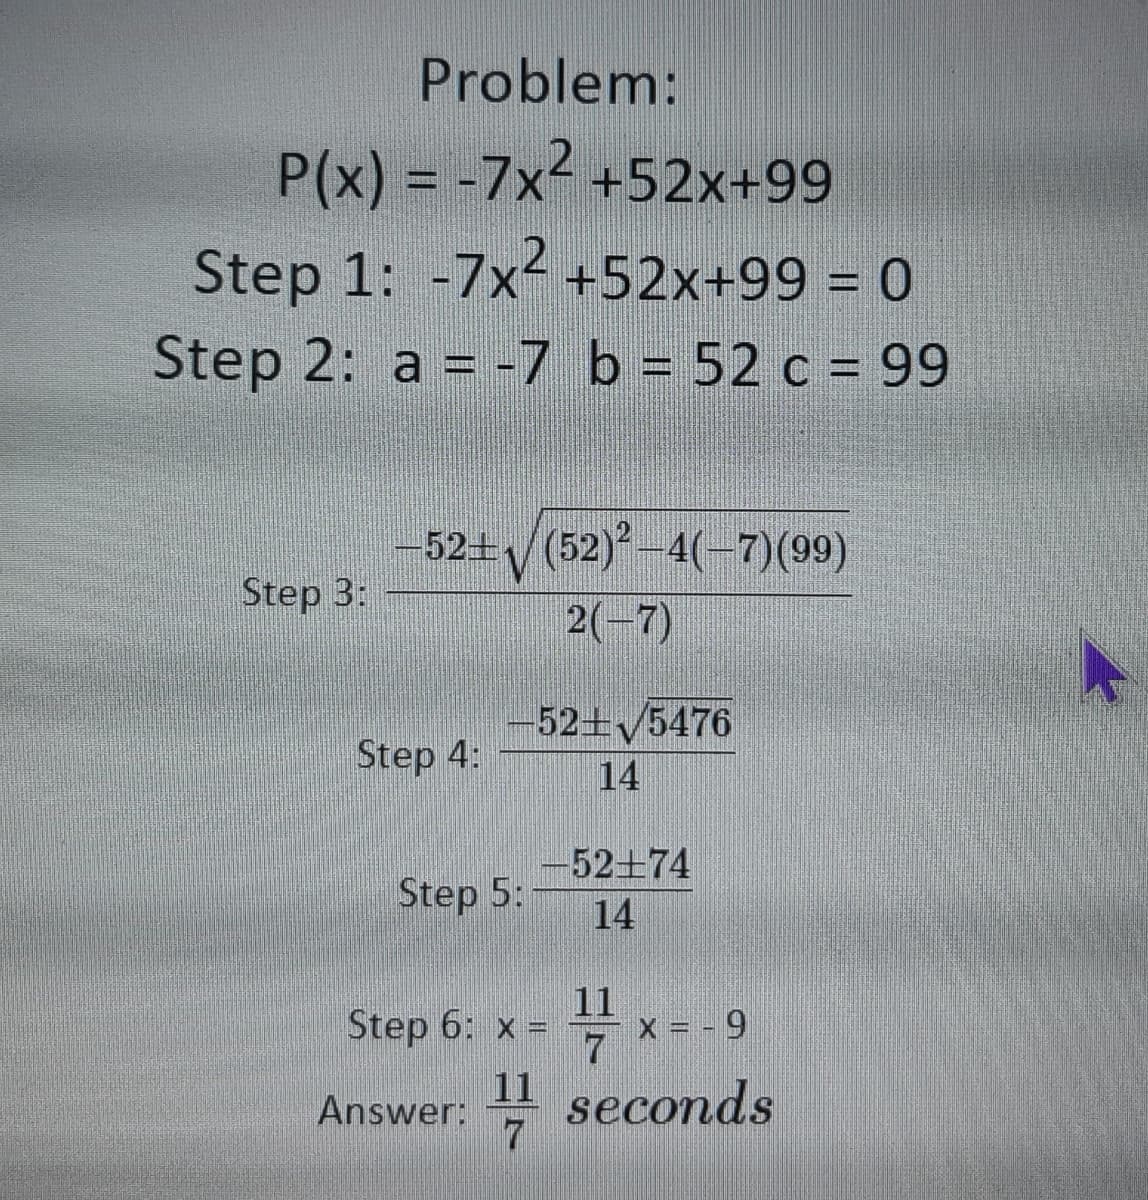 Problem:
P(x) = -7x2 +52x+99
Step 1: -7x- +52x+99 = 0
Step 2: a = -7 b = 52 c = 99
-52+/(52)-4(-7)(99)
Step 3:
2(-7)
-52+5476
Step 4:
14
52+74
Step 5:
14
11
x = - 9
7
Step 6: x =
11 seconds
7.
Answer:
